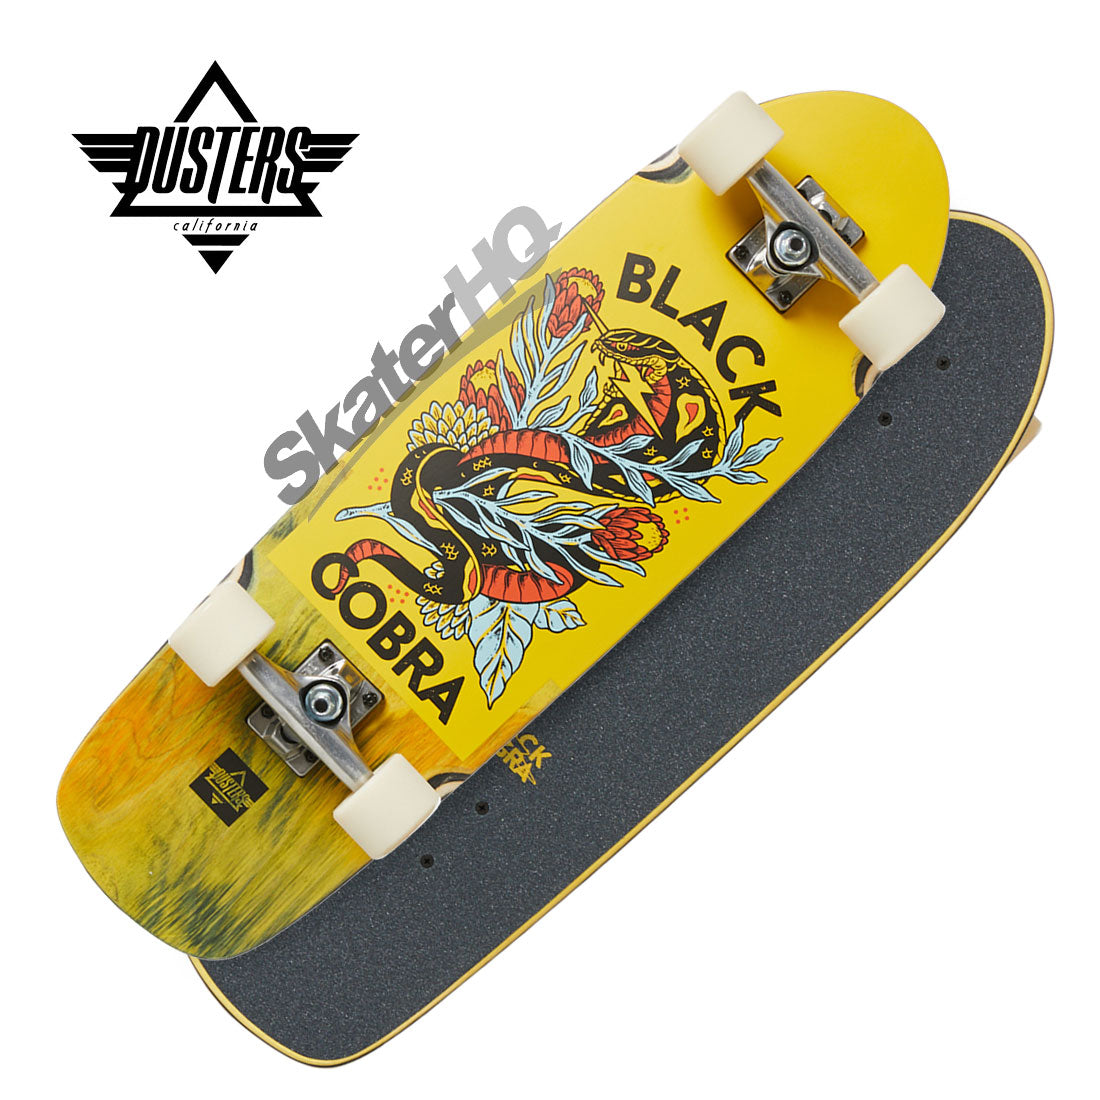 Dusters Cobra 29 Cruiser Complete - Yellow Skateboard Compl Cruisers